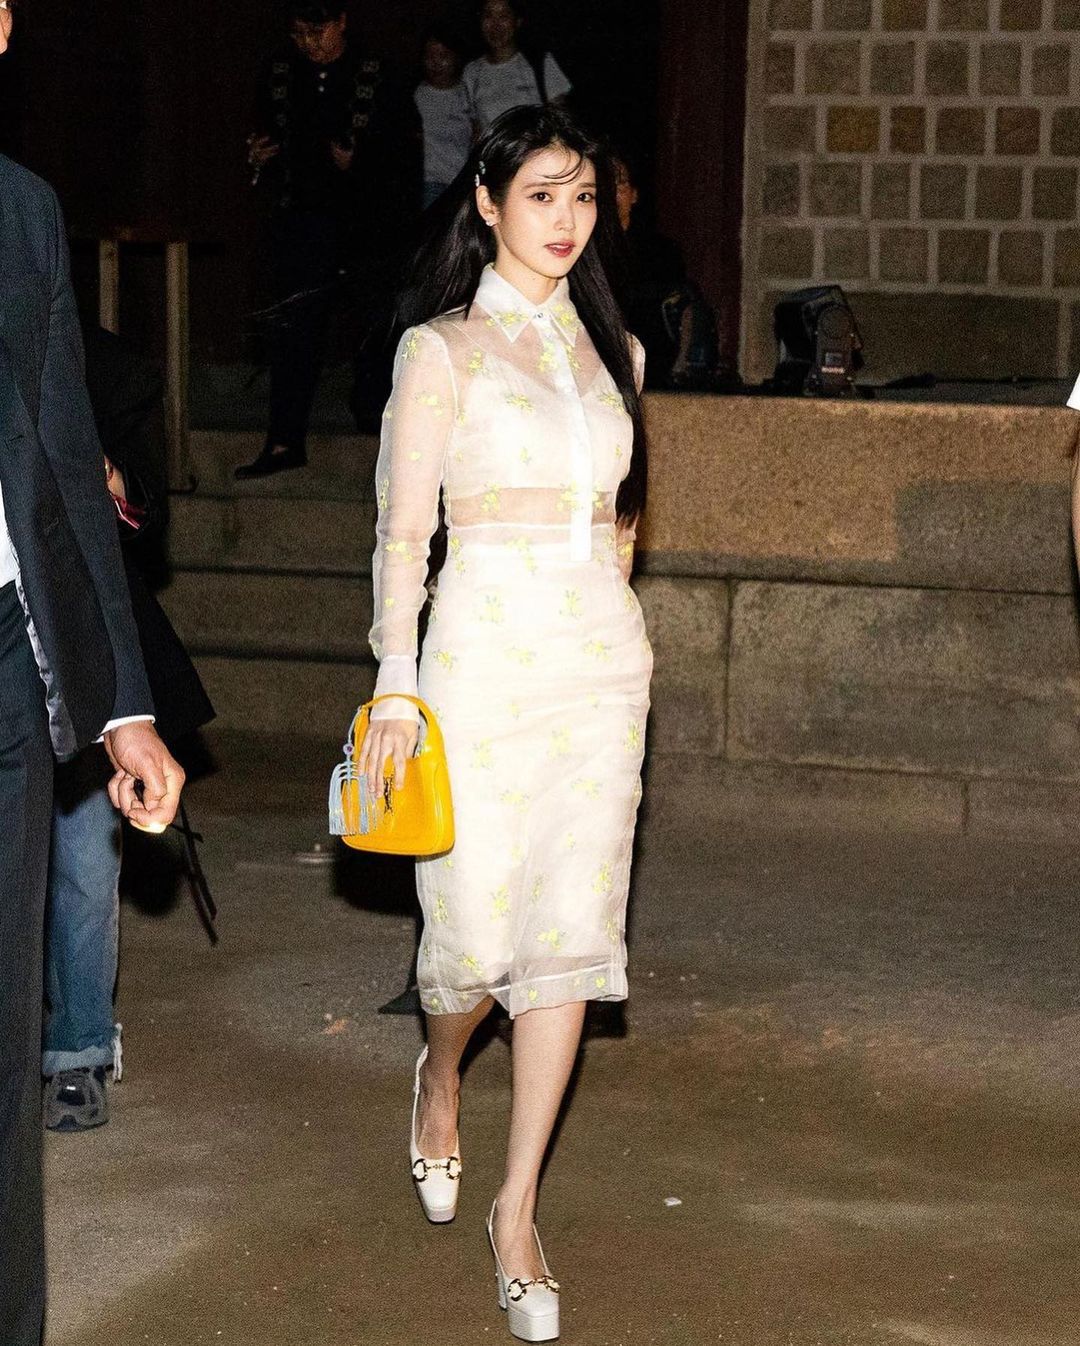 IU is cute even in everyday life.. Private clothes fashion full of sense